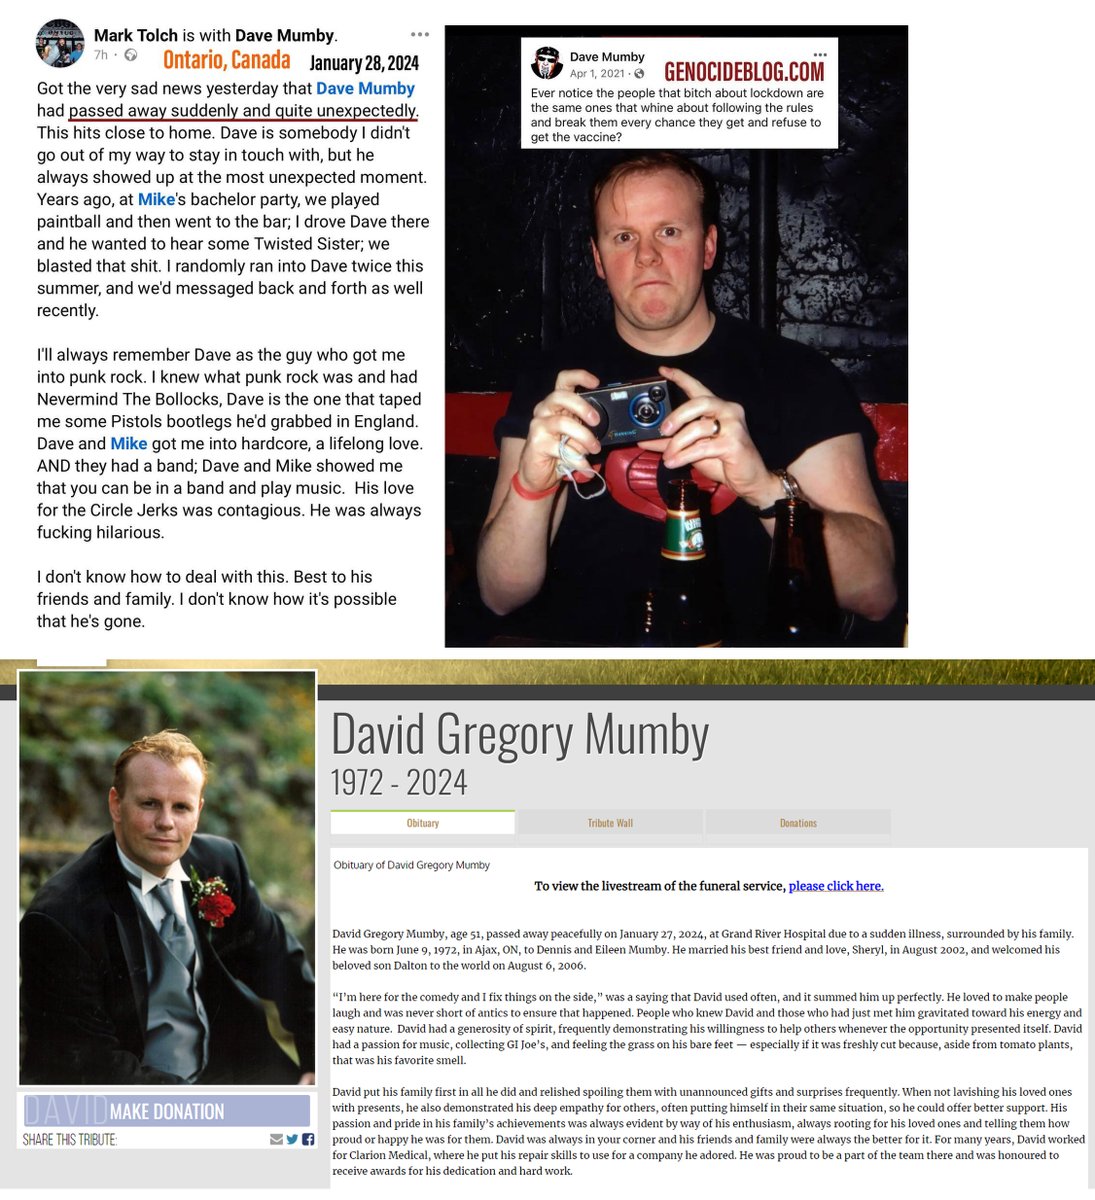 Kitchener, ON - 51 year old David Mumby died Jan.27, 2024 from 'brief illness' Apr.2021: 'Ever notice the people that bitch about lockdown are the same ones that whine about following the rules and break them every chance they get and refuse to get the vaccine?' #DiedSuddenly